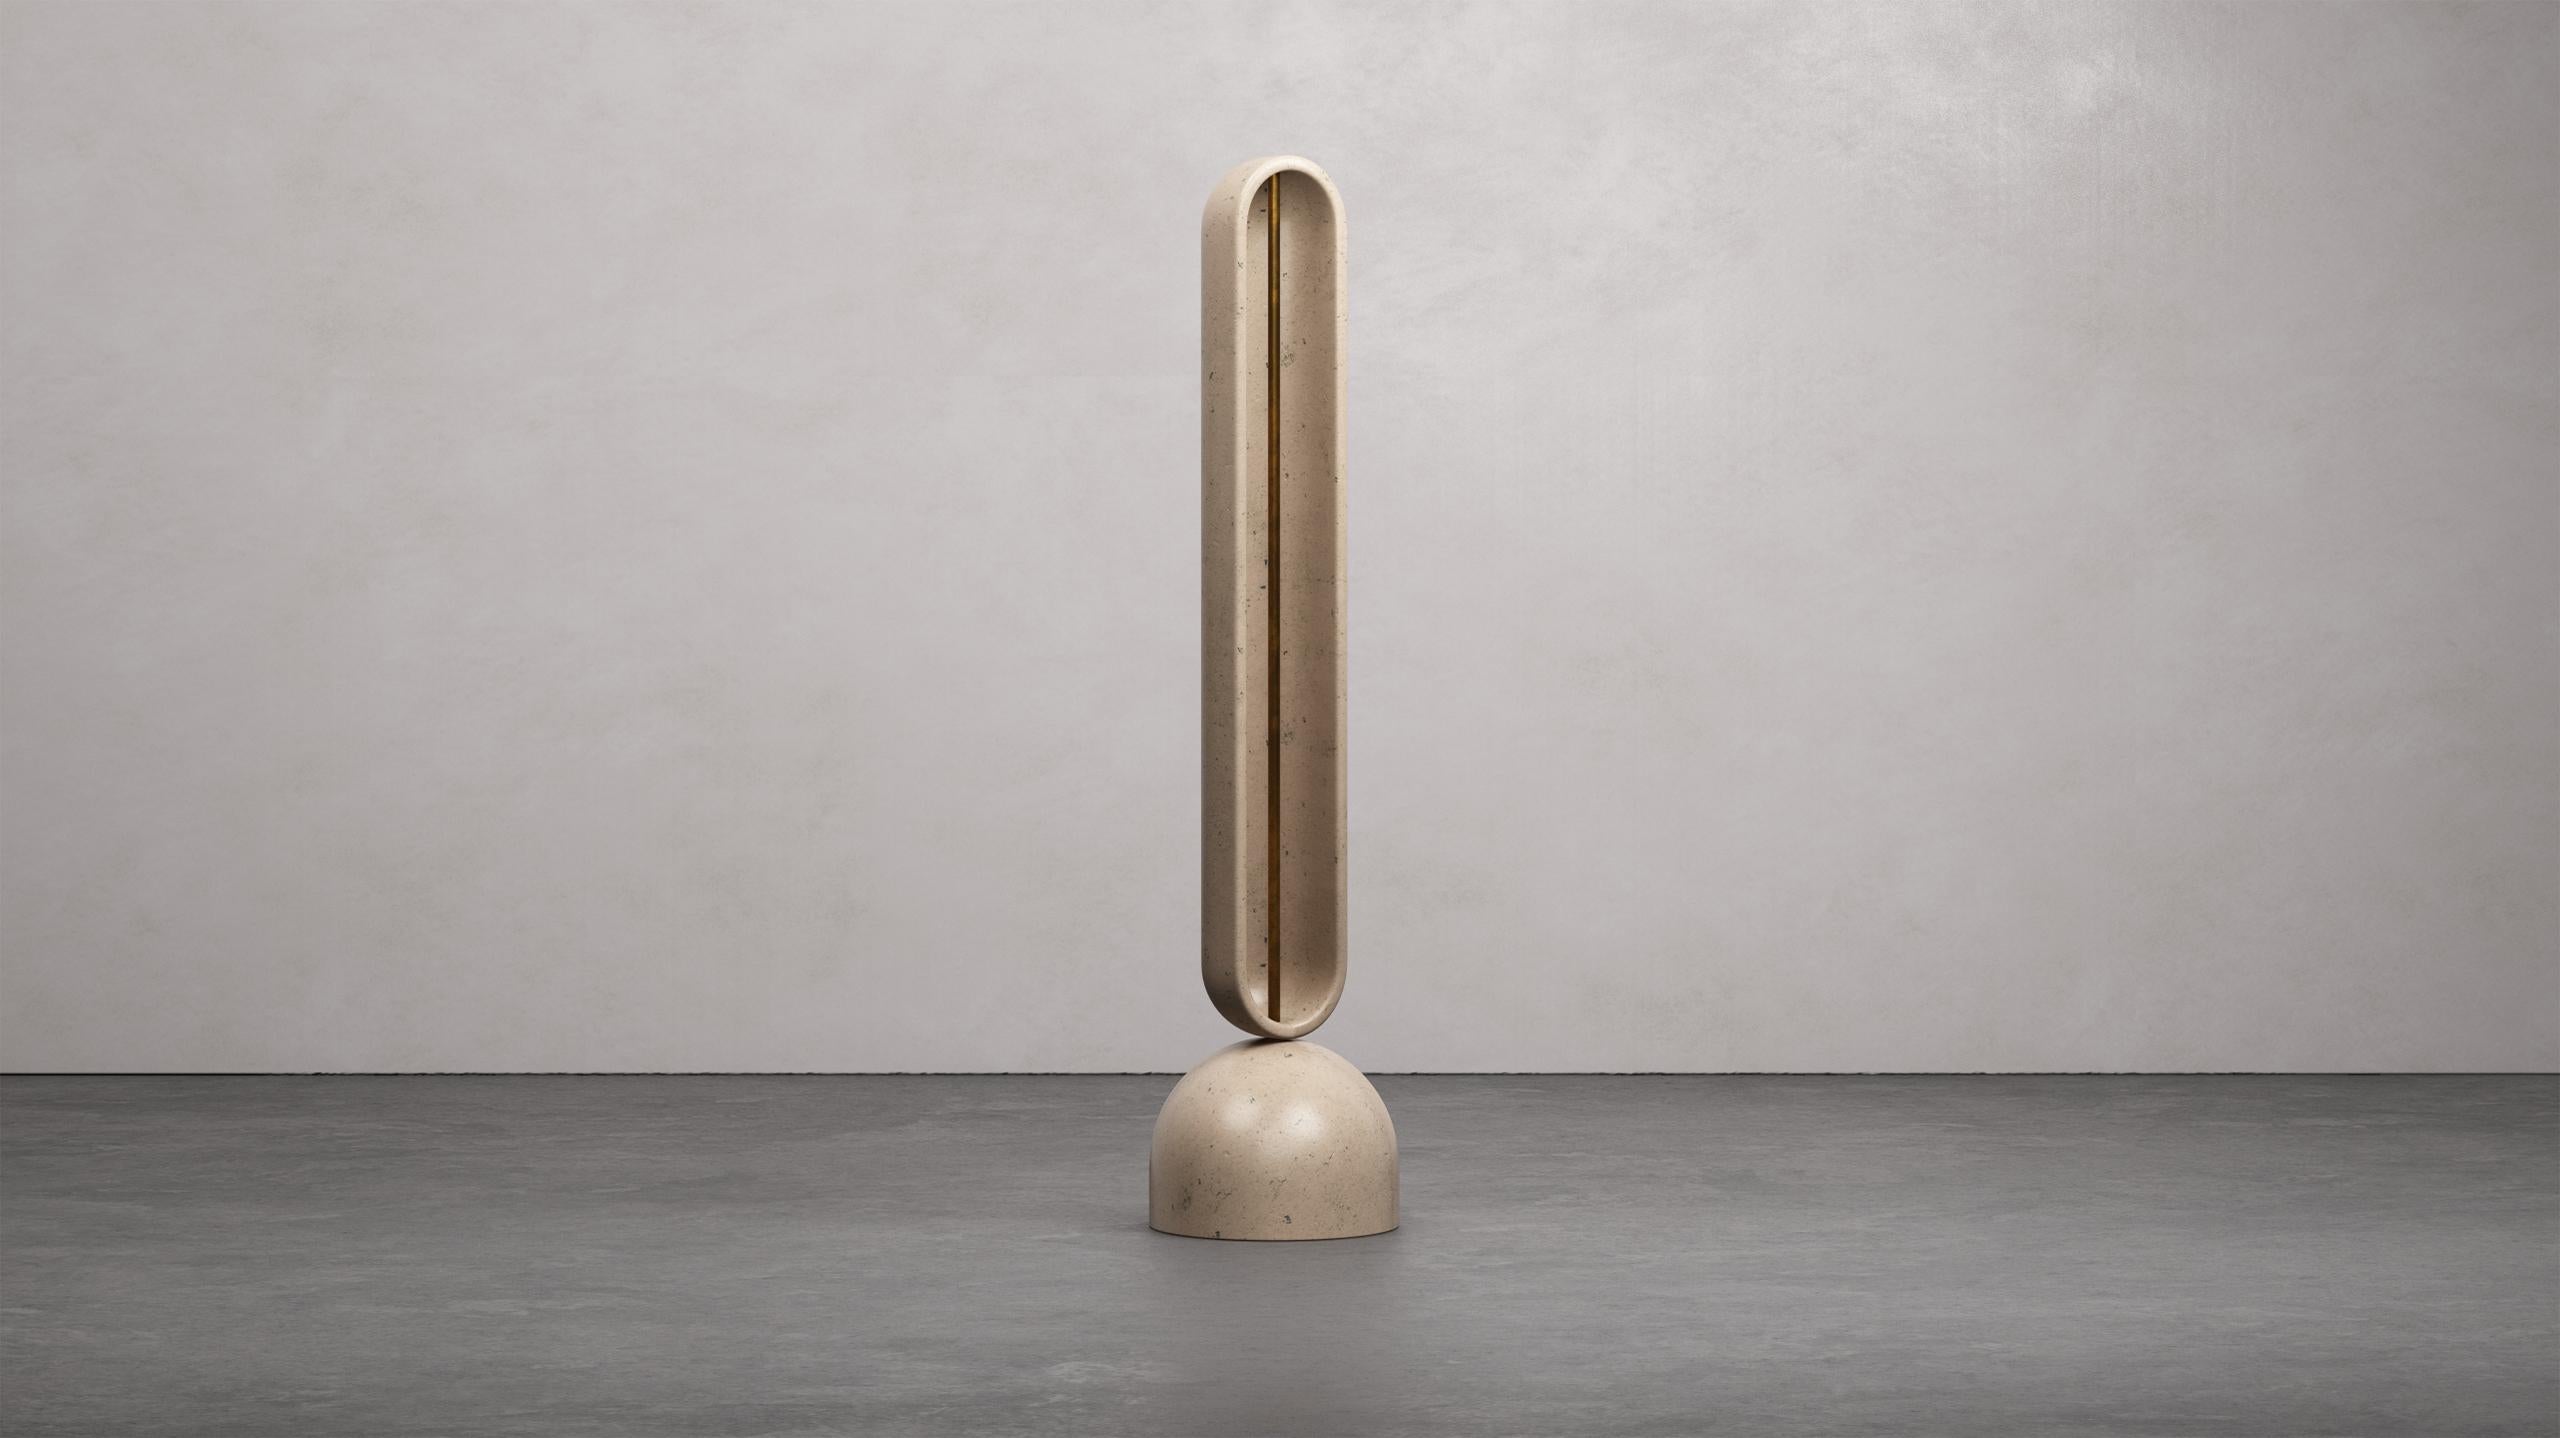 Emersion floor lamp by Arthur Vallin
Limited 12 + 2 A/P
Dimensions: W 12 x D 12 x H 54 inch
Materials: Travertin Navona, brass
Finishing: Matte Un-honed
Lava stone finish available.

French Artist, Designer, and Creative Director Arthur Vallin hold